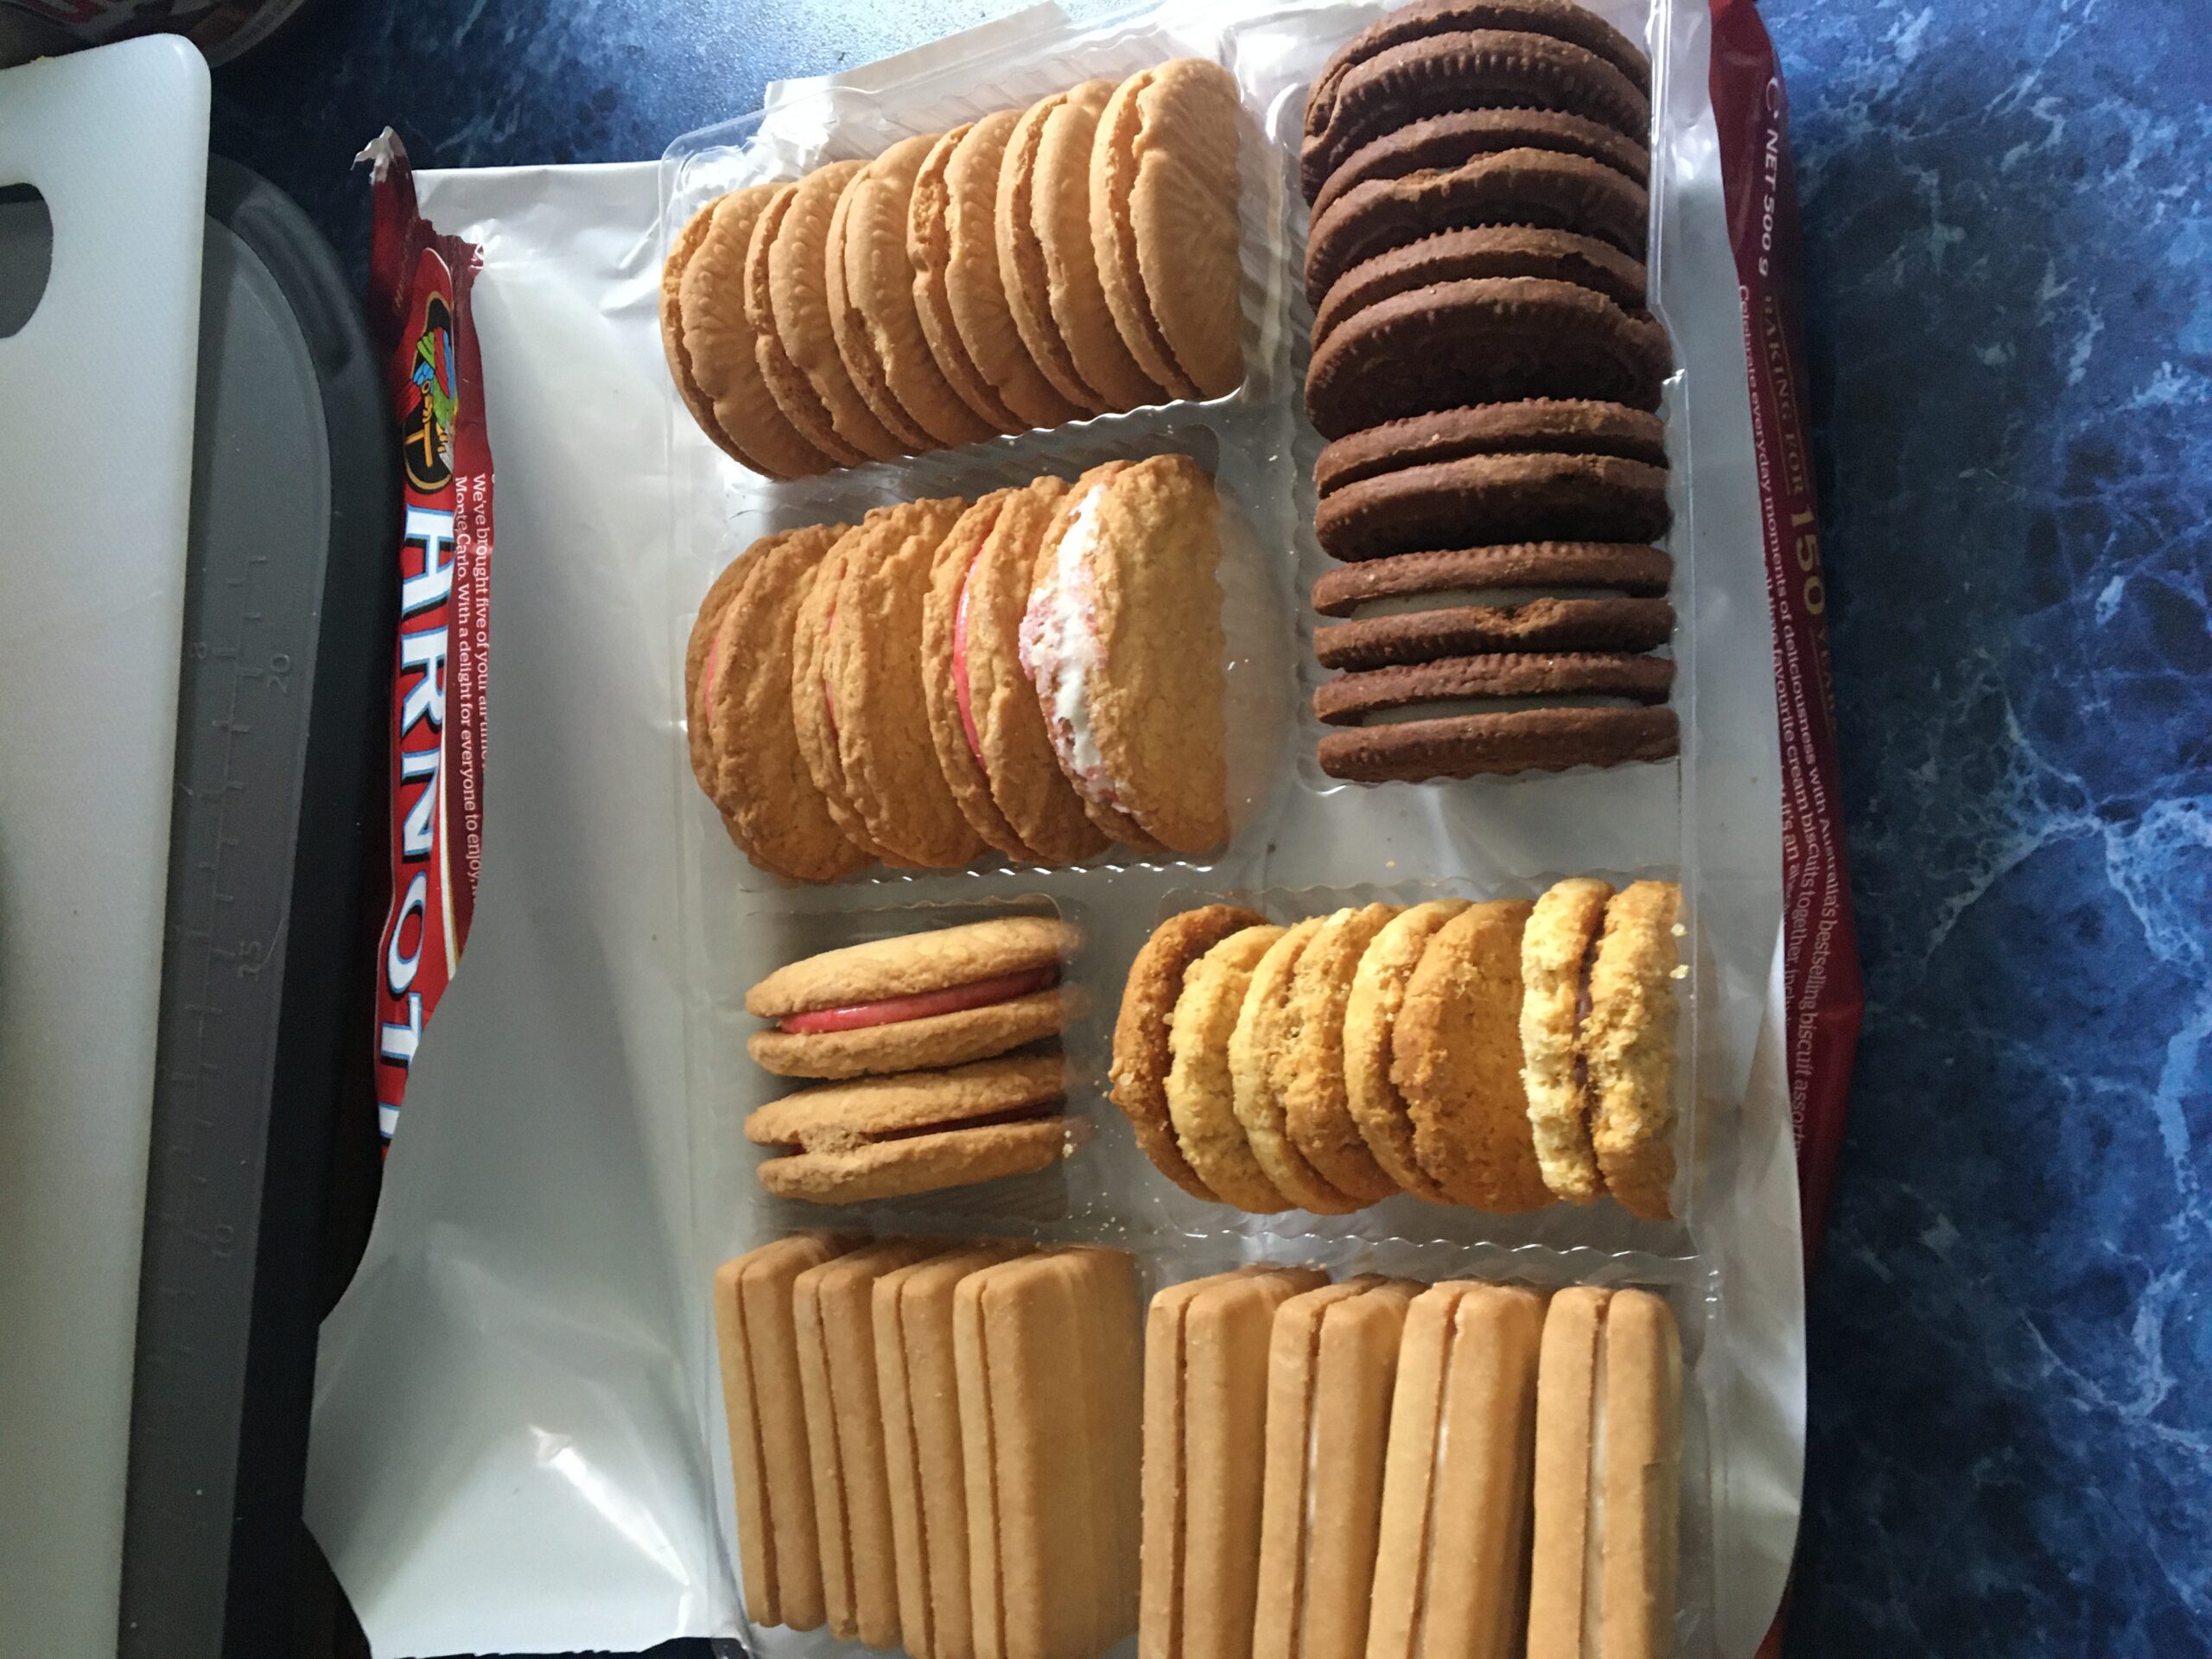 Arnotts Biscuits complaint Poor quality of biscuits